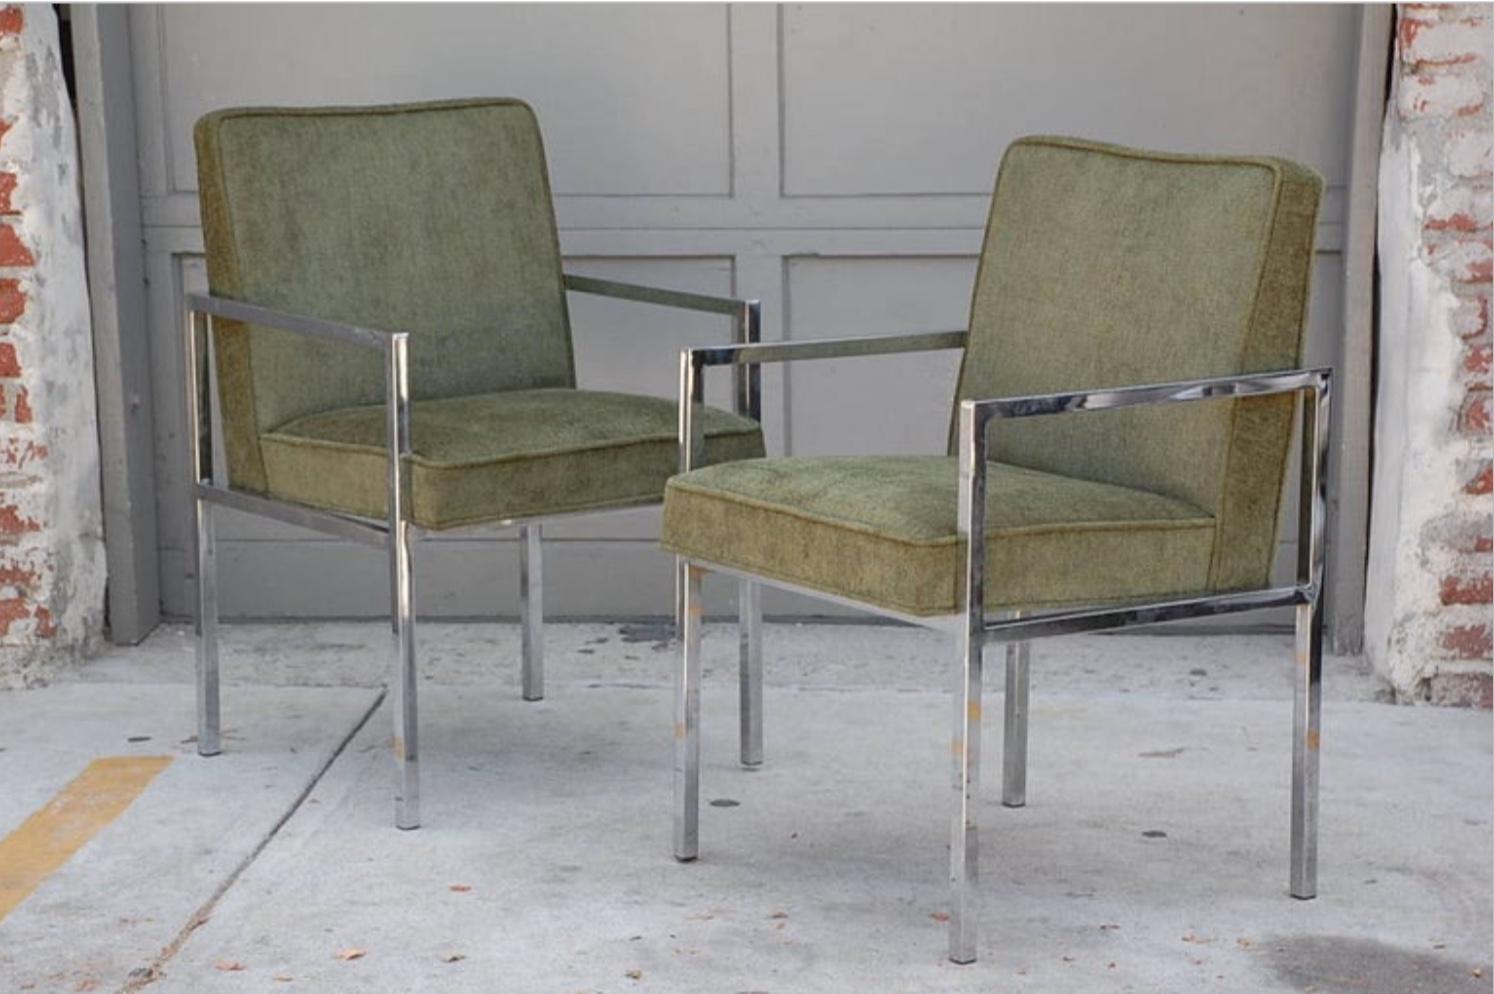 American Pair of Chic Chromed Steel Upholstered Armchairs For Sale